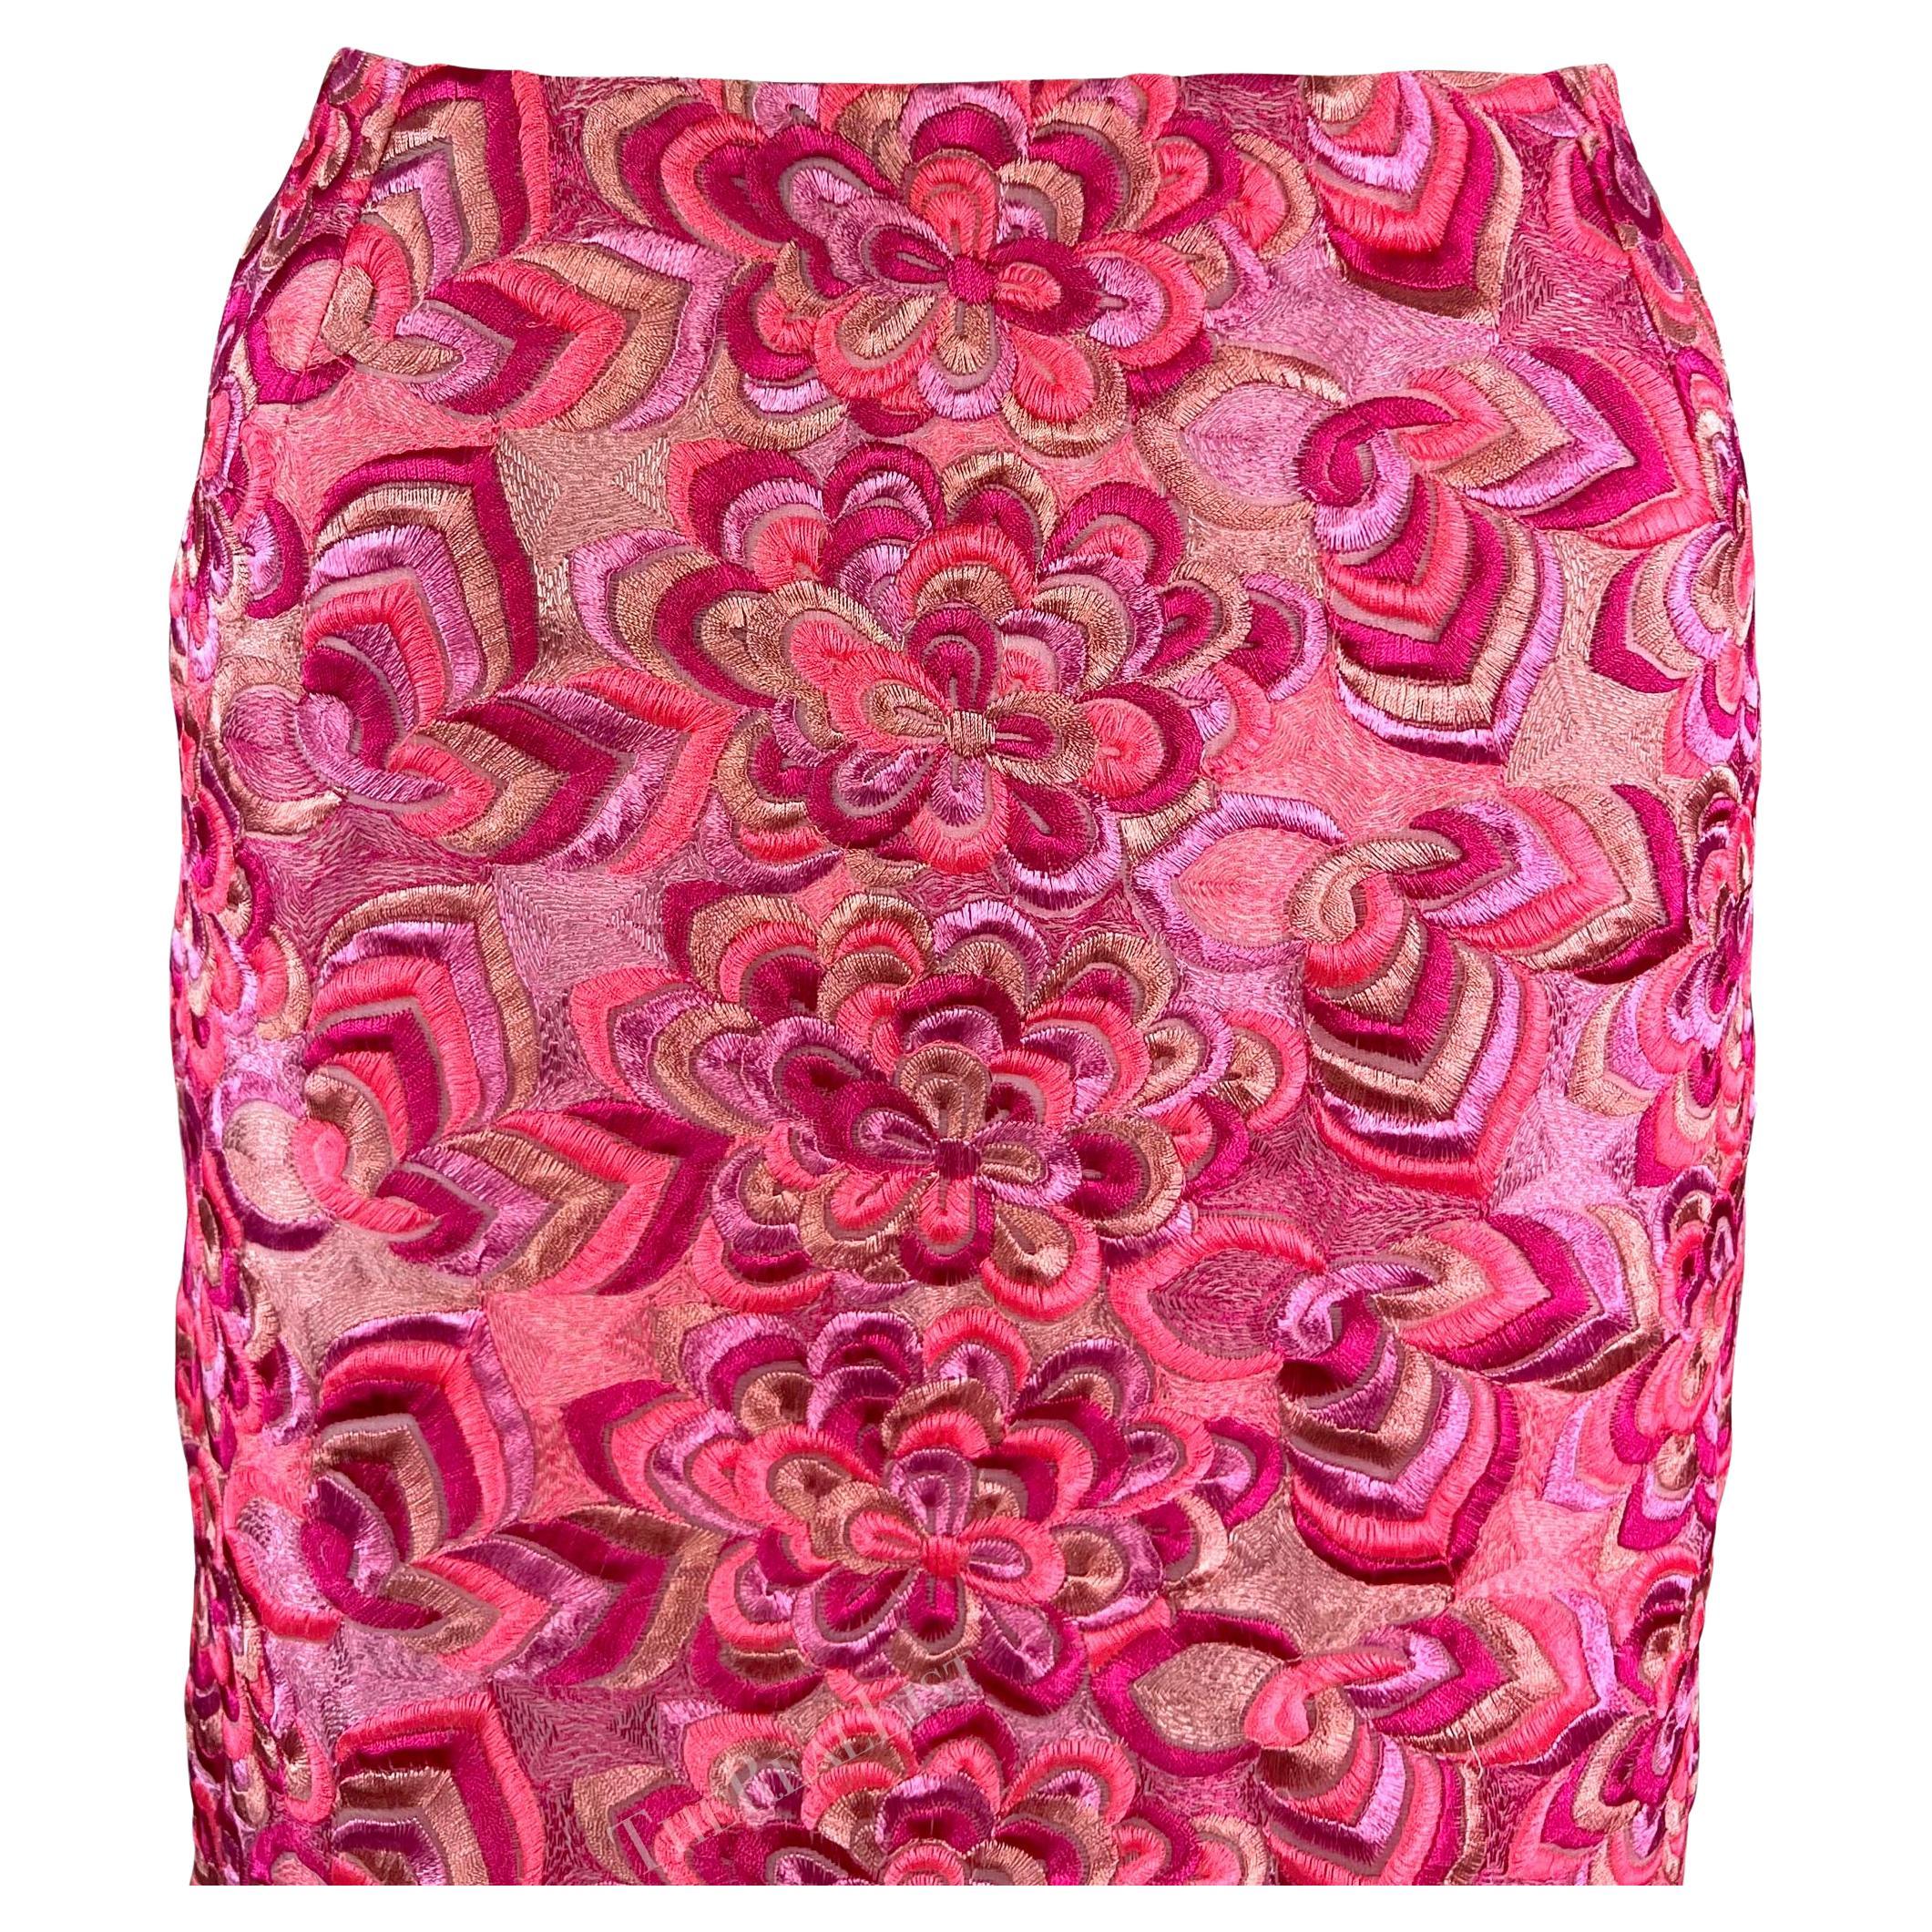 Presenting a hot pink skirt Versace skirt, designed by Donatella Versace. From Donatella's landmark Spring/Summer 2000 collection, this skirt is completely covered in intricate floral embroidery. A rare find, this Y2K beauty is masterfully tapered